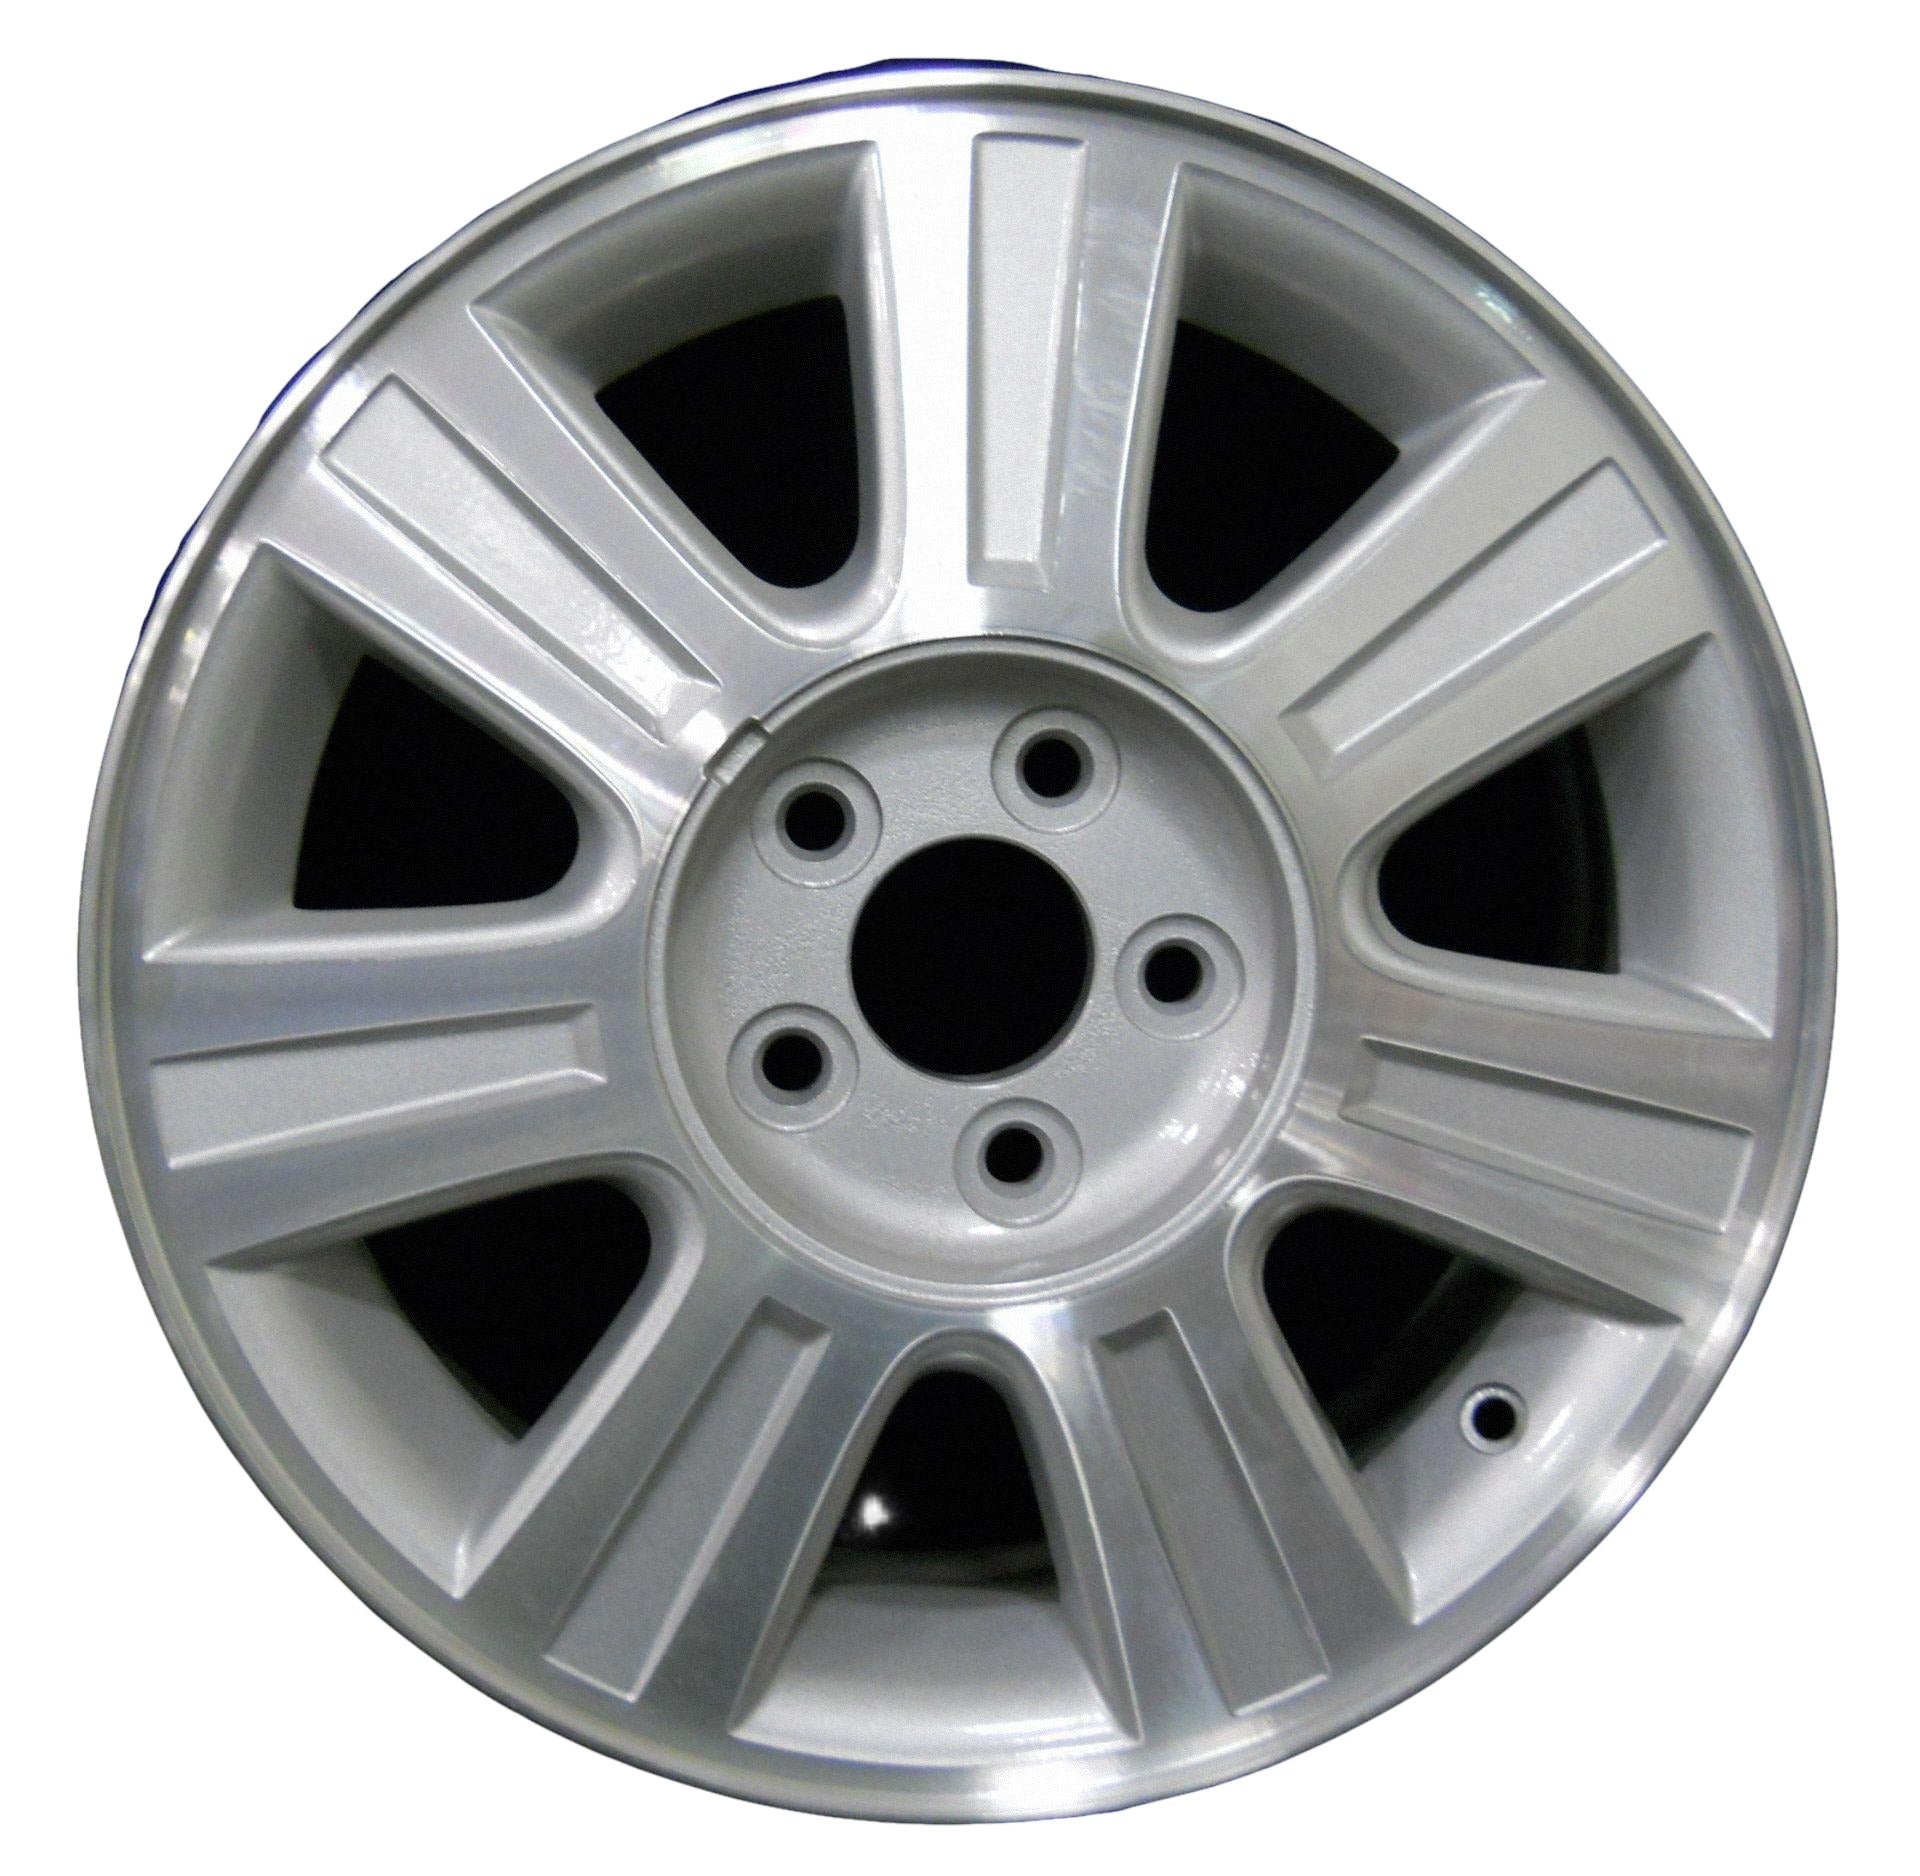 Ford Taurus  2003, 2004, 2005, 2006, 2007 Factory OEM Car Wheel Size 16x6 Alloy WAO.3506.PS02.MA